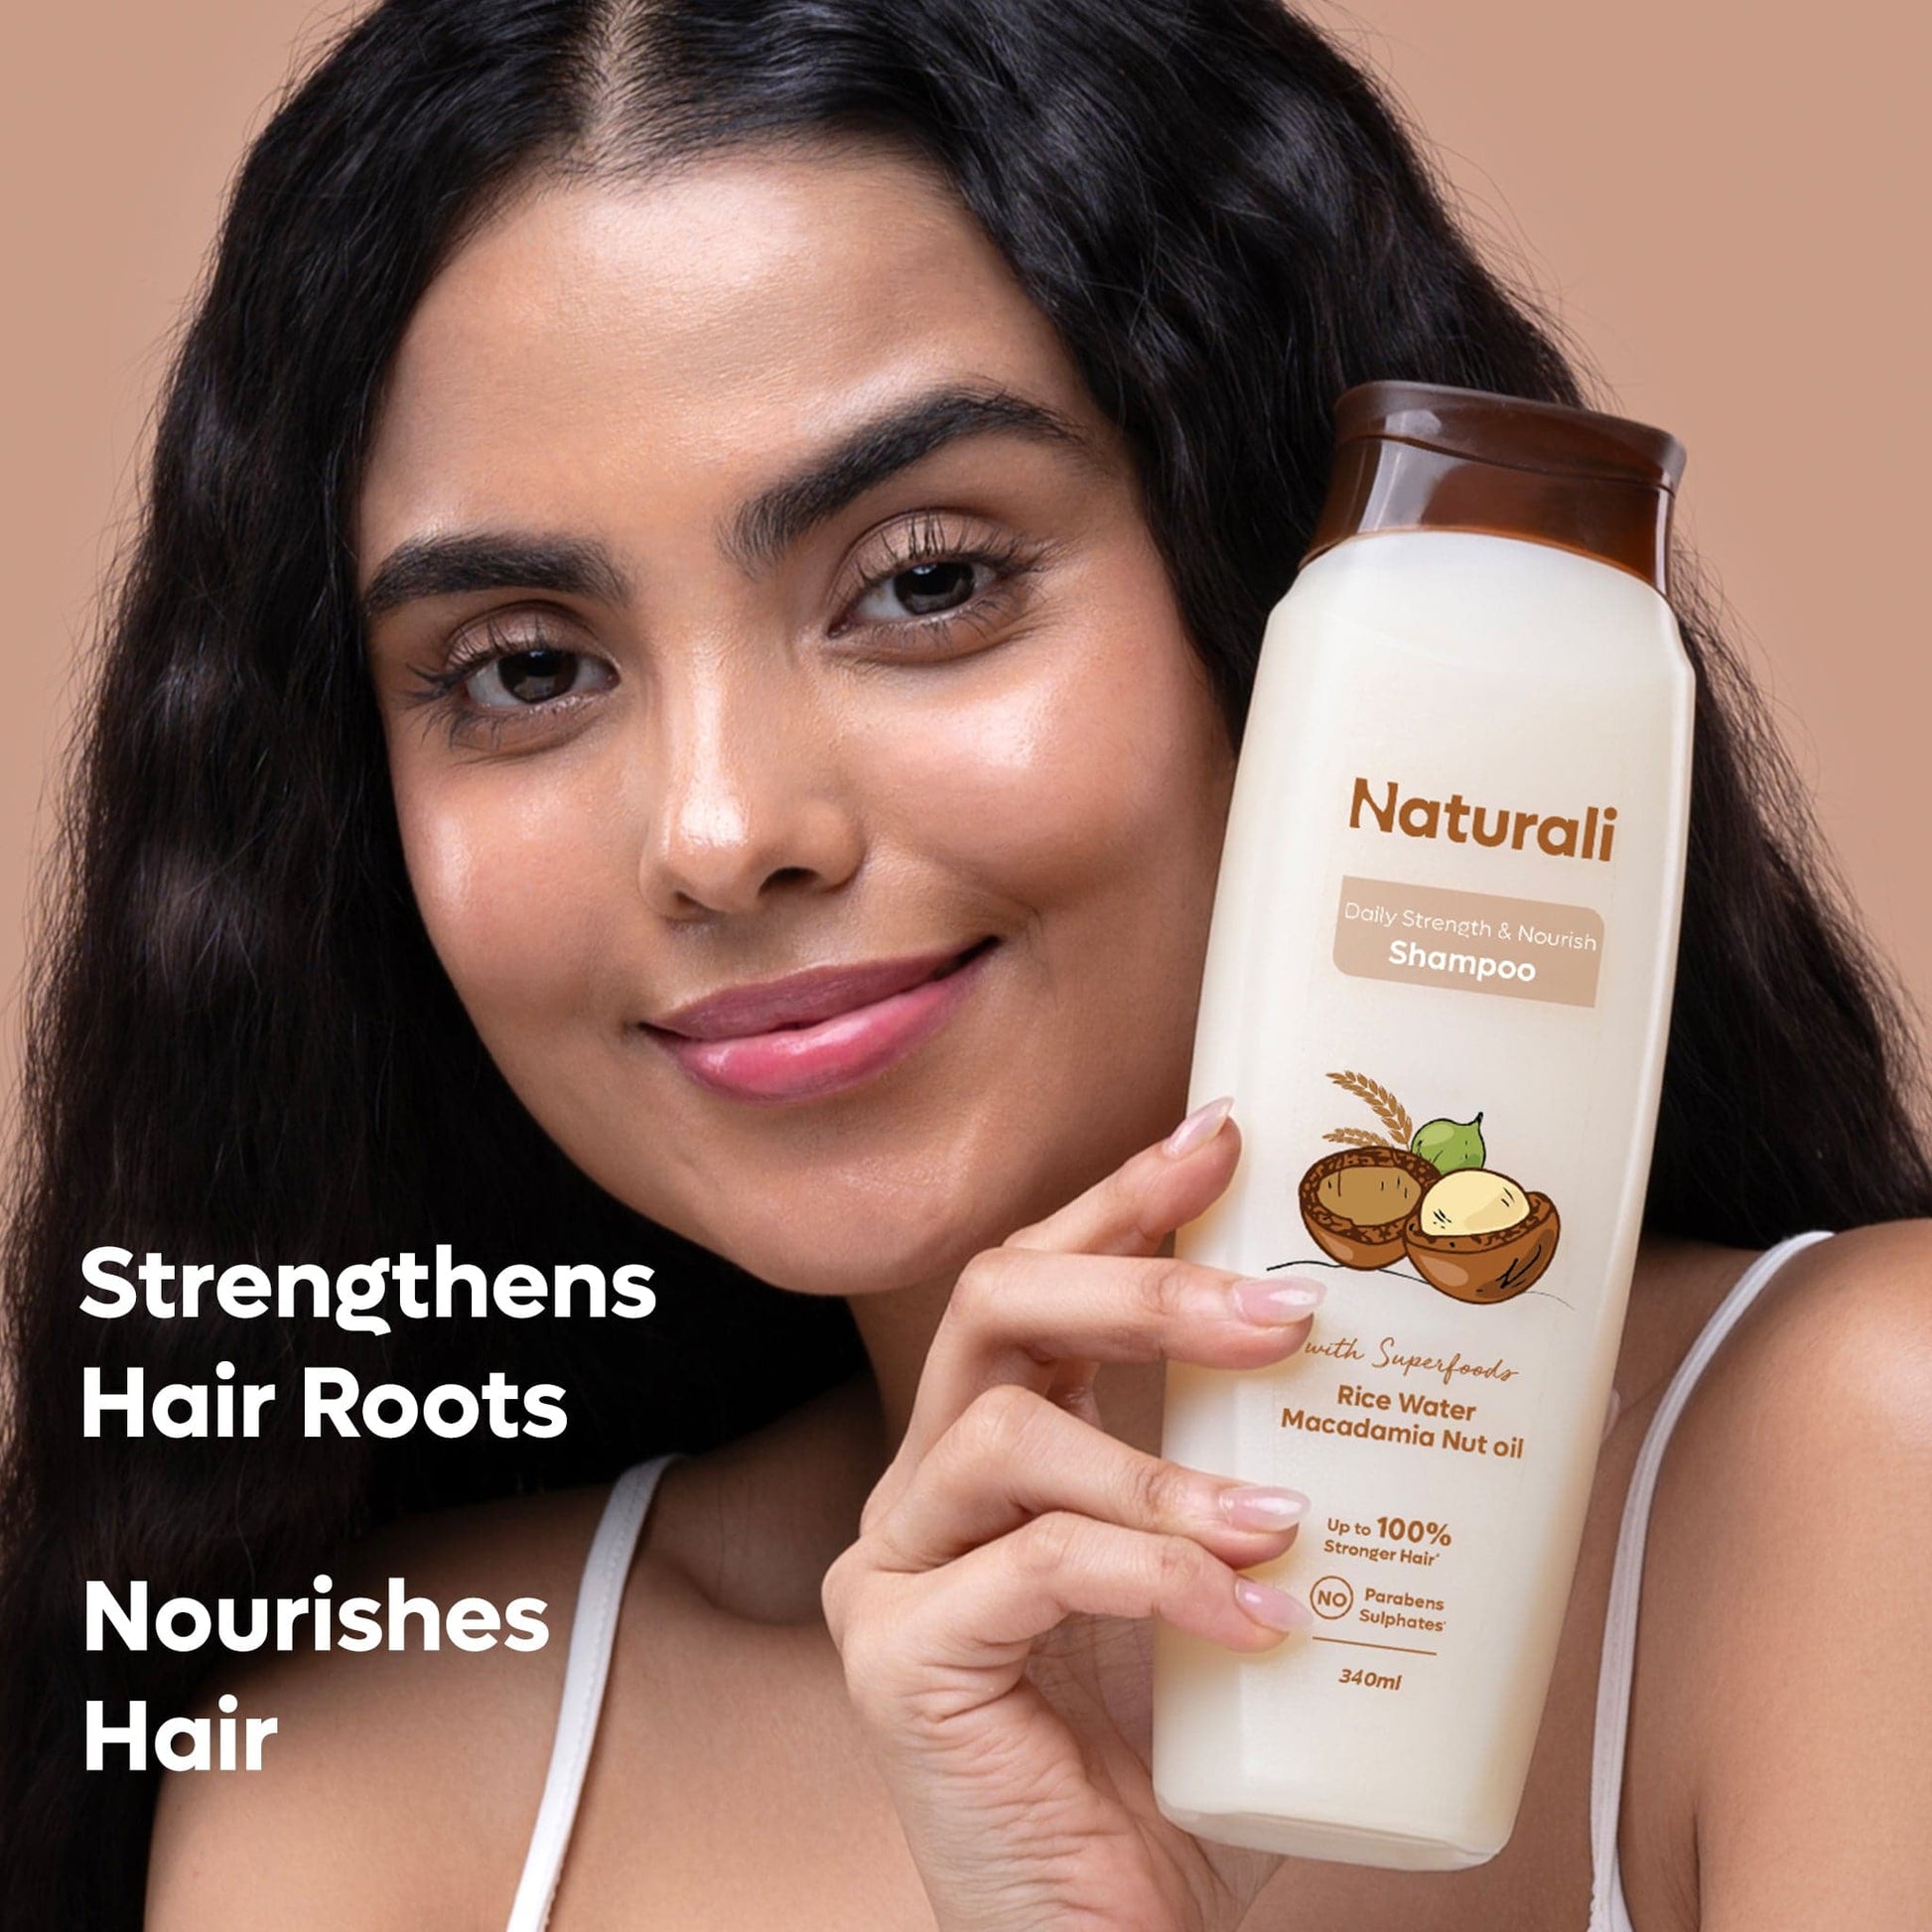 Daily Strength & Nourish Shampoo with Rice Water and Macadamia Nut Oil